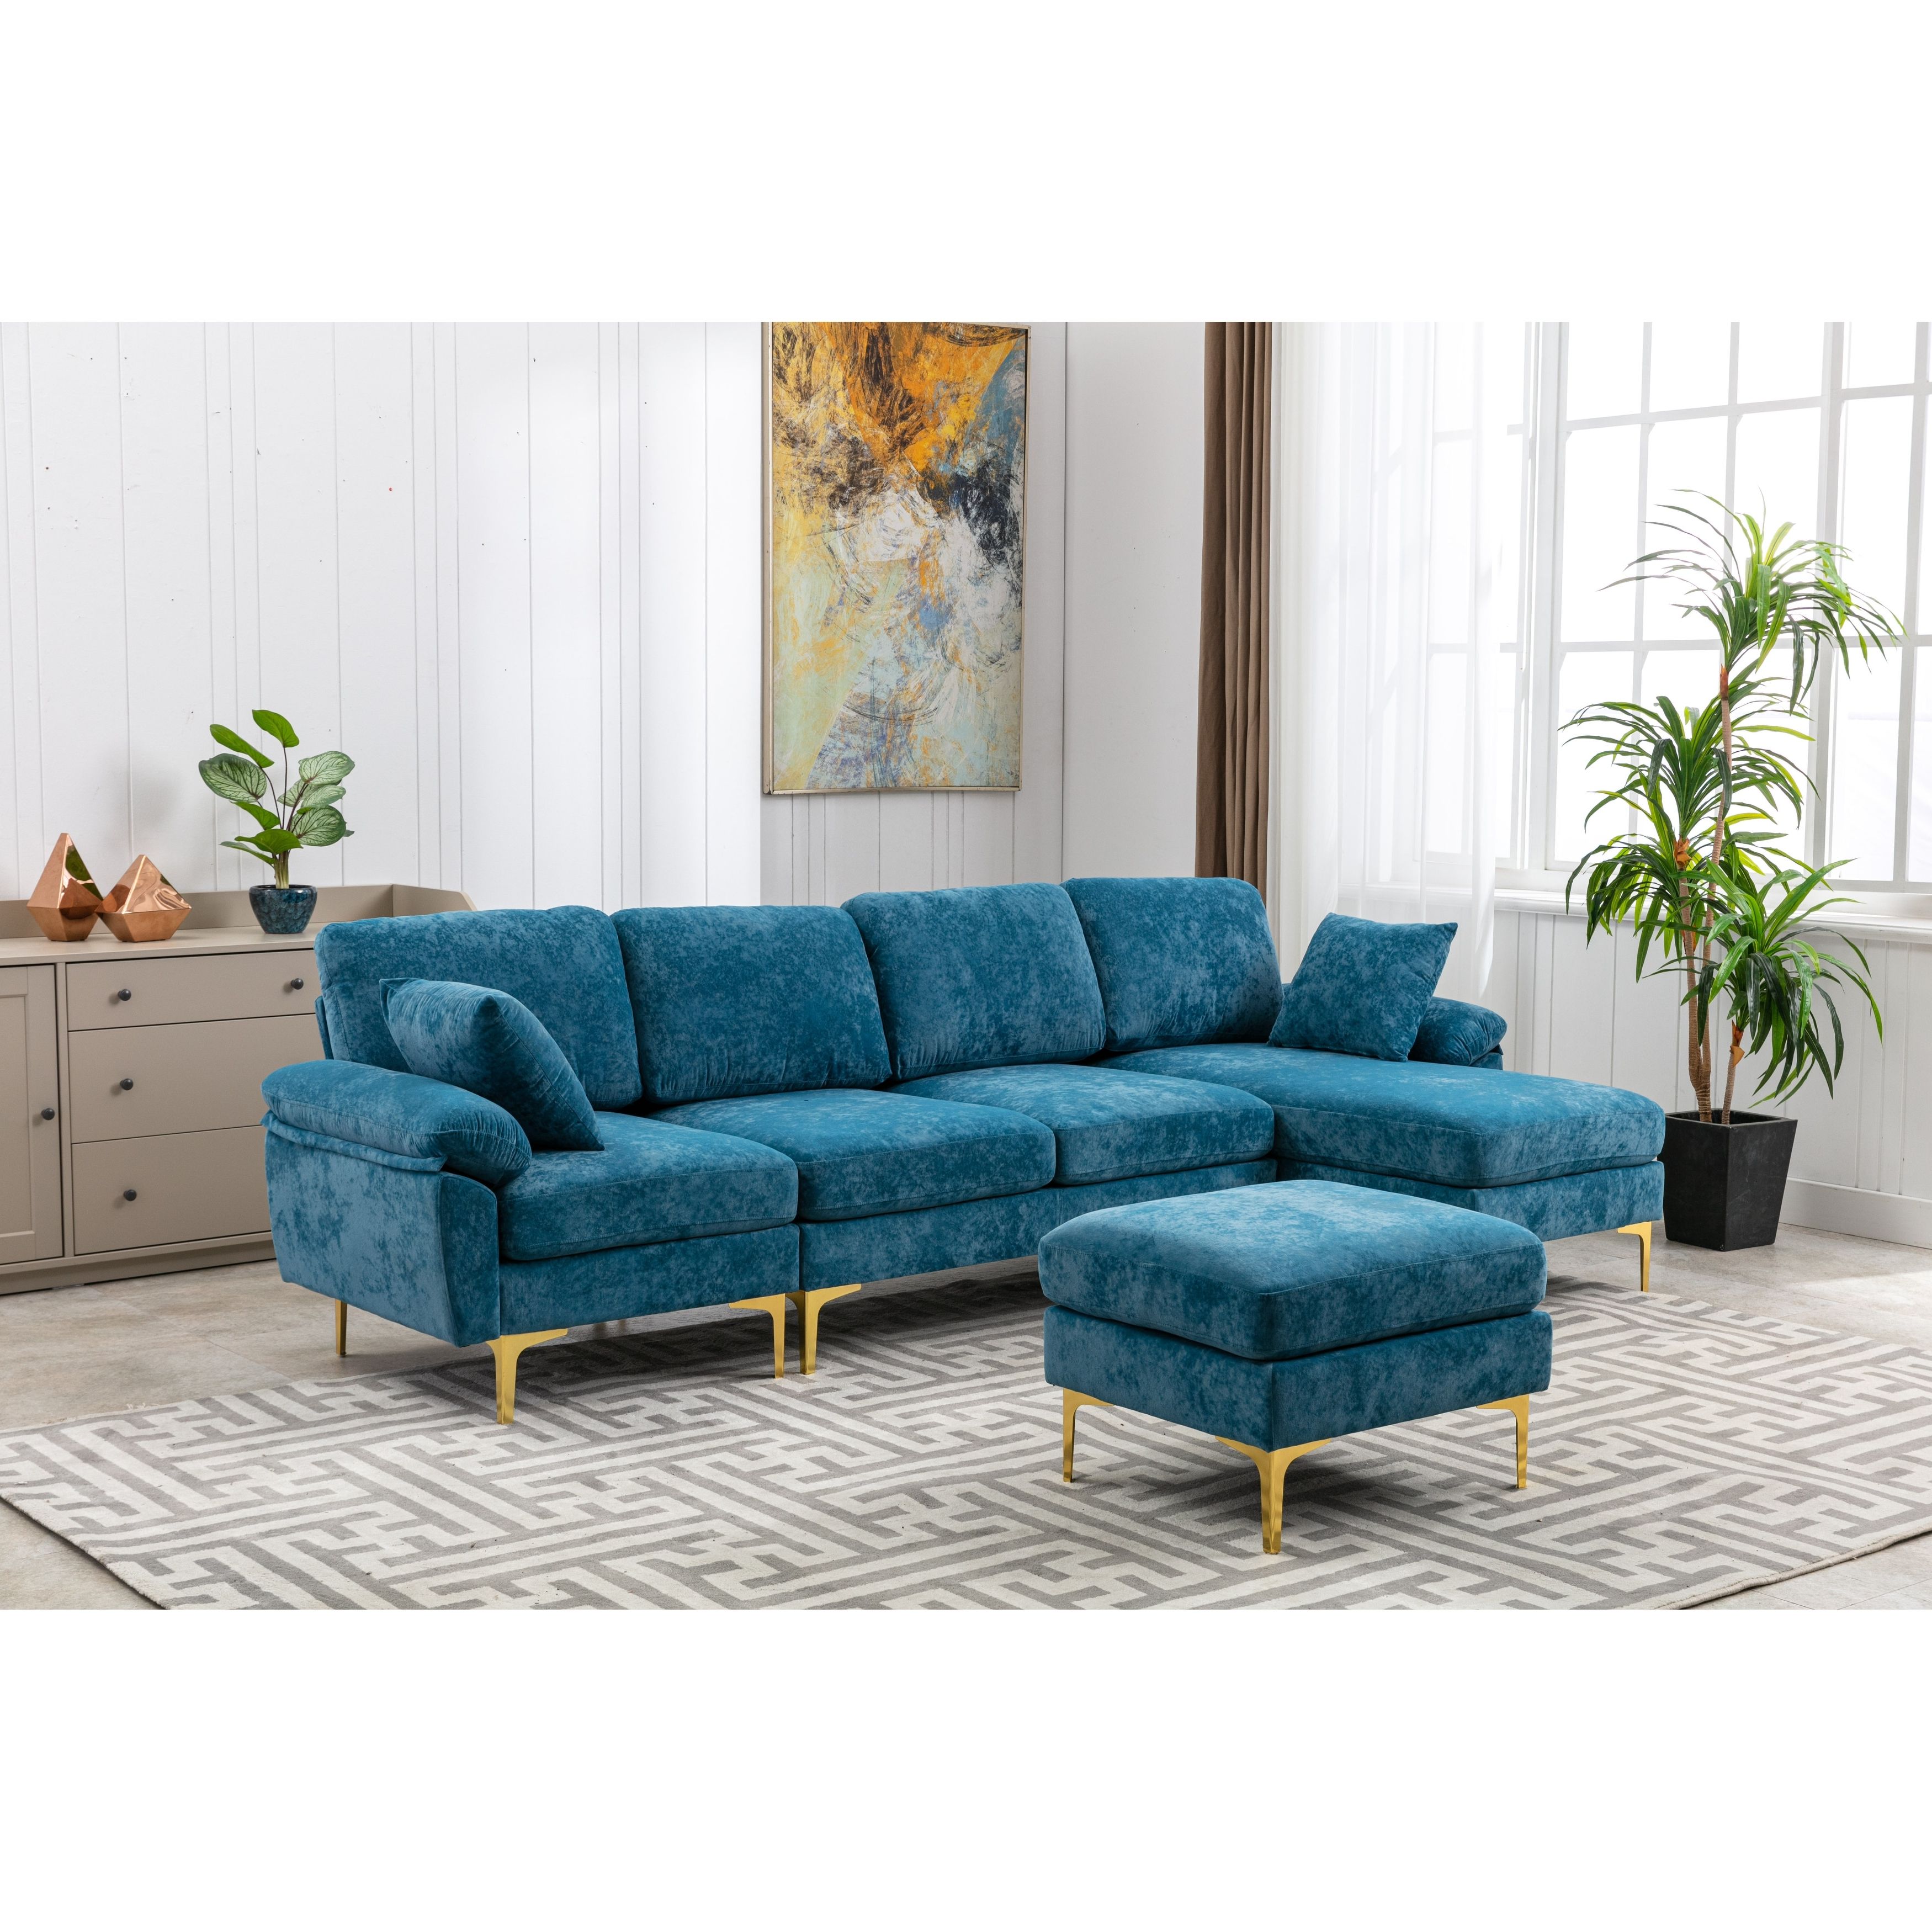 Living Room Sectional Sofa, L Shaped Upholstered Couch With Movable Ottoman,  Convertible Modular Sofa With Gold Metal Legs – – 36690154 Regarding Sectional Sofas With Movable Ottoman (Gallery 8 of 20)